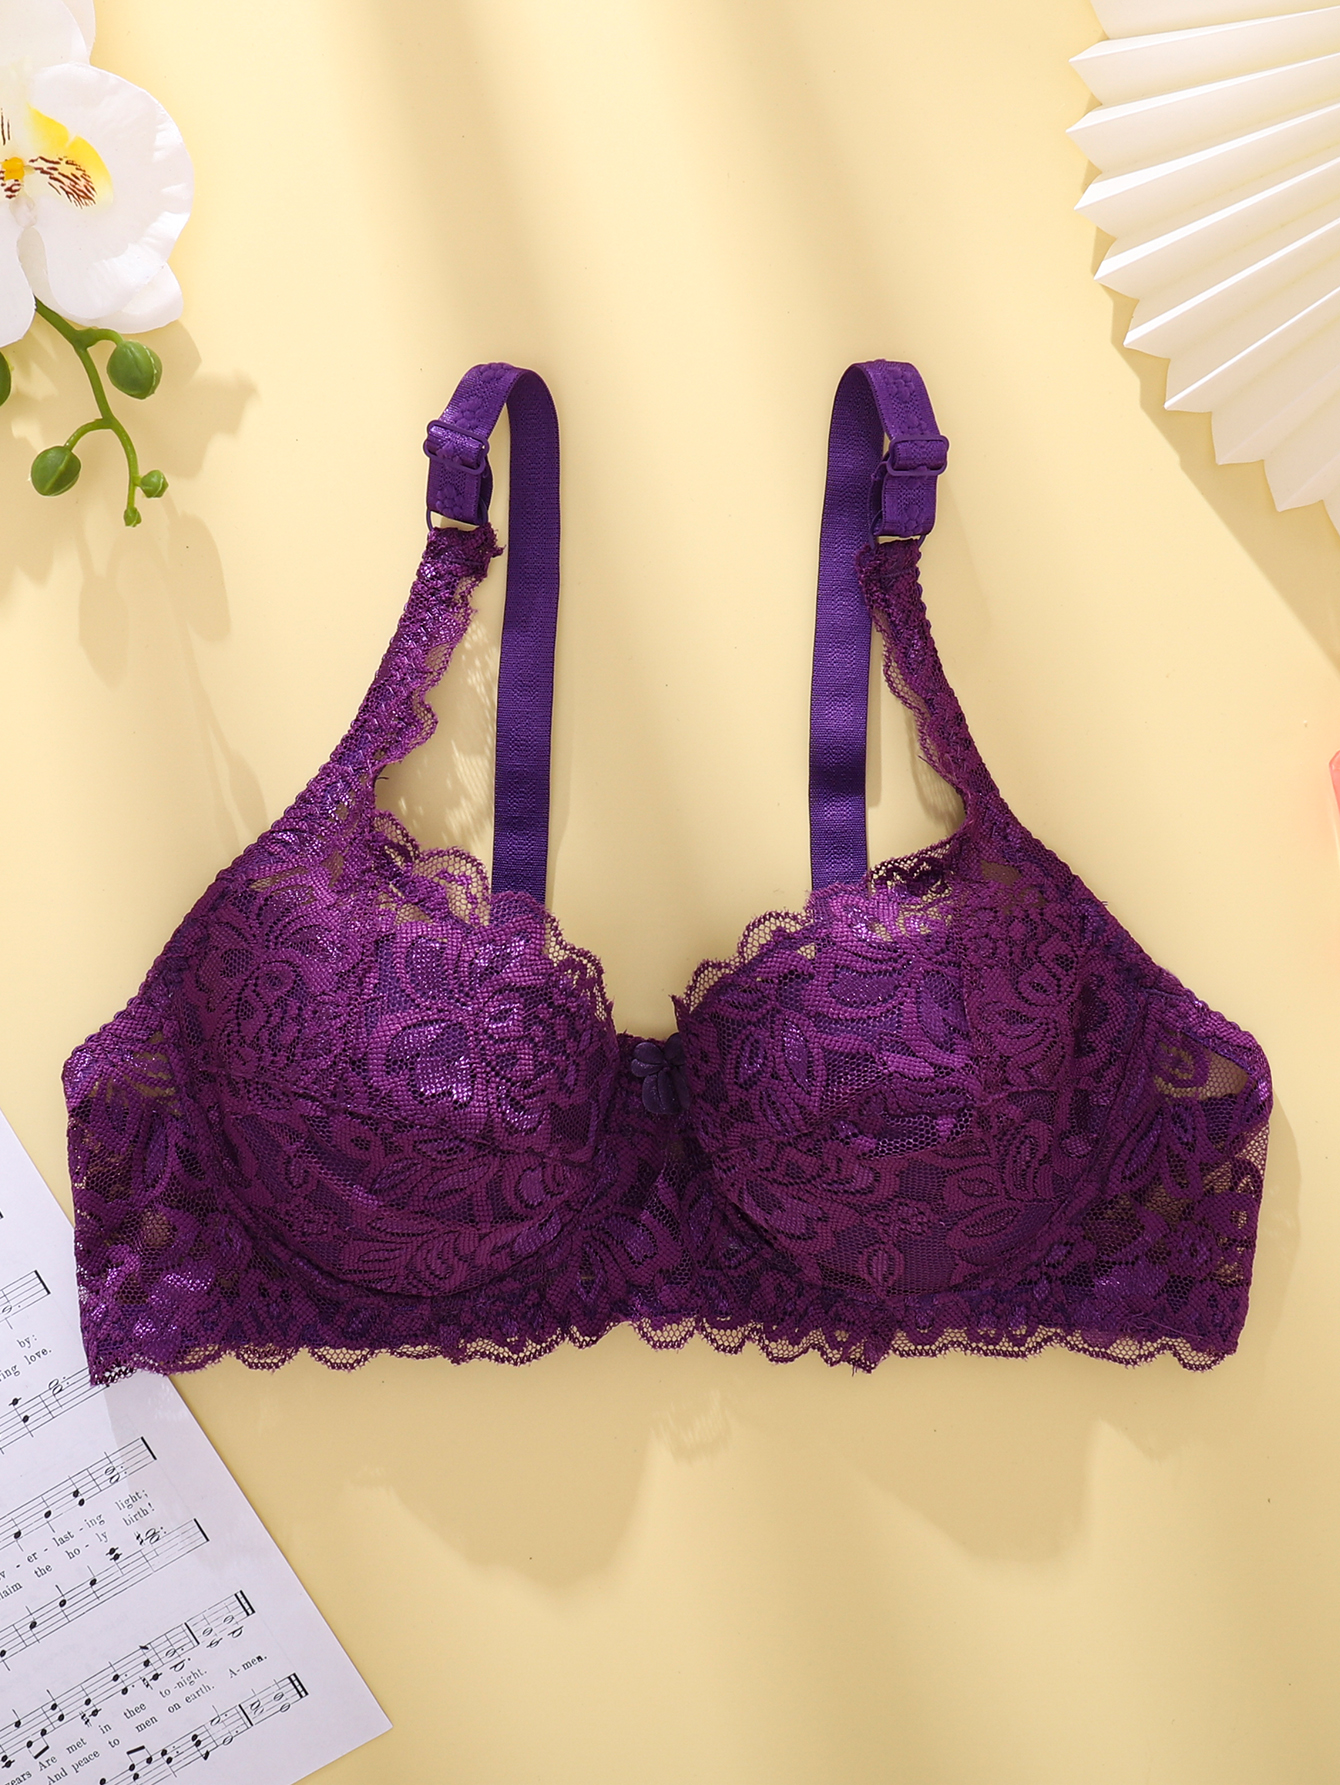 This is Love Lace Bralette - Dusty Purple